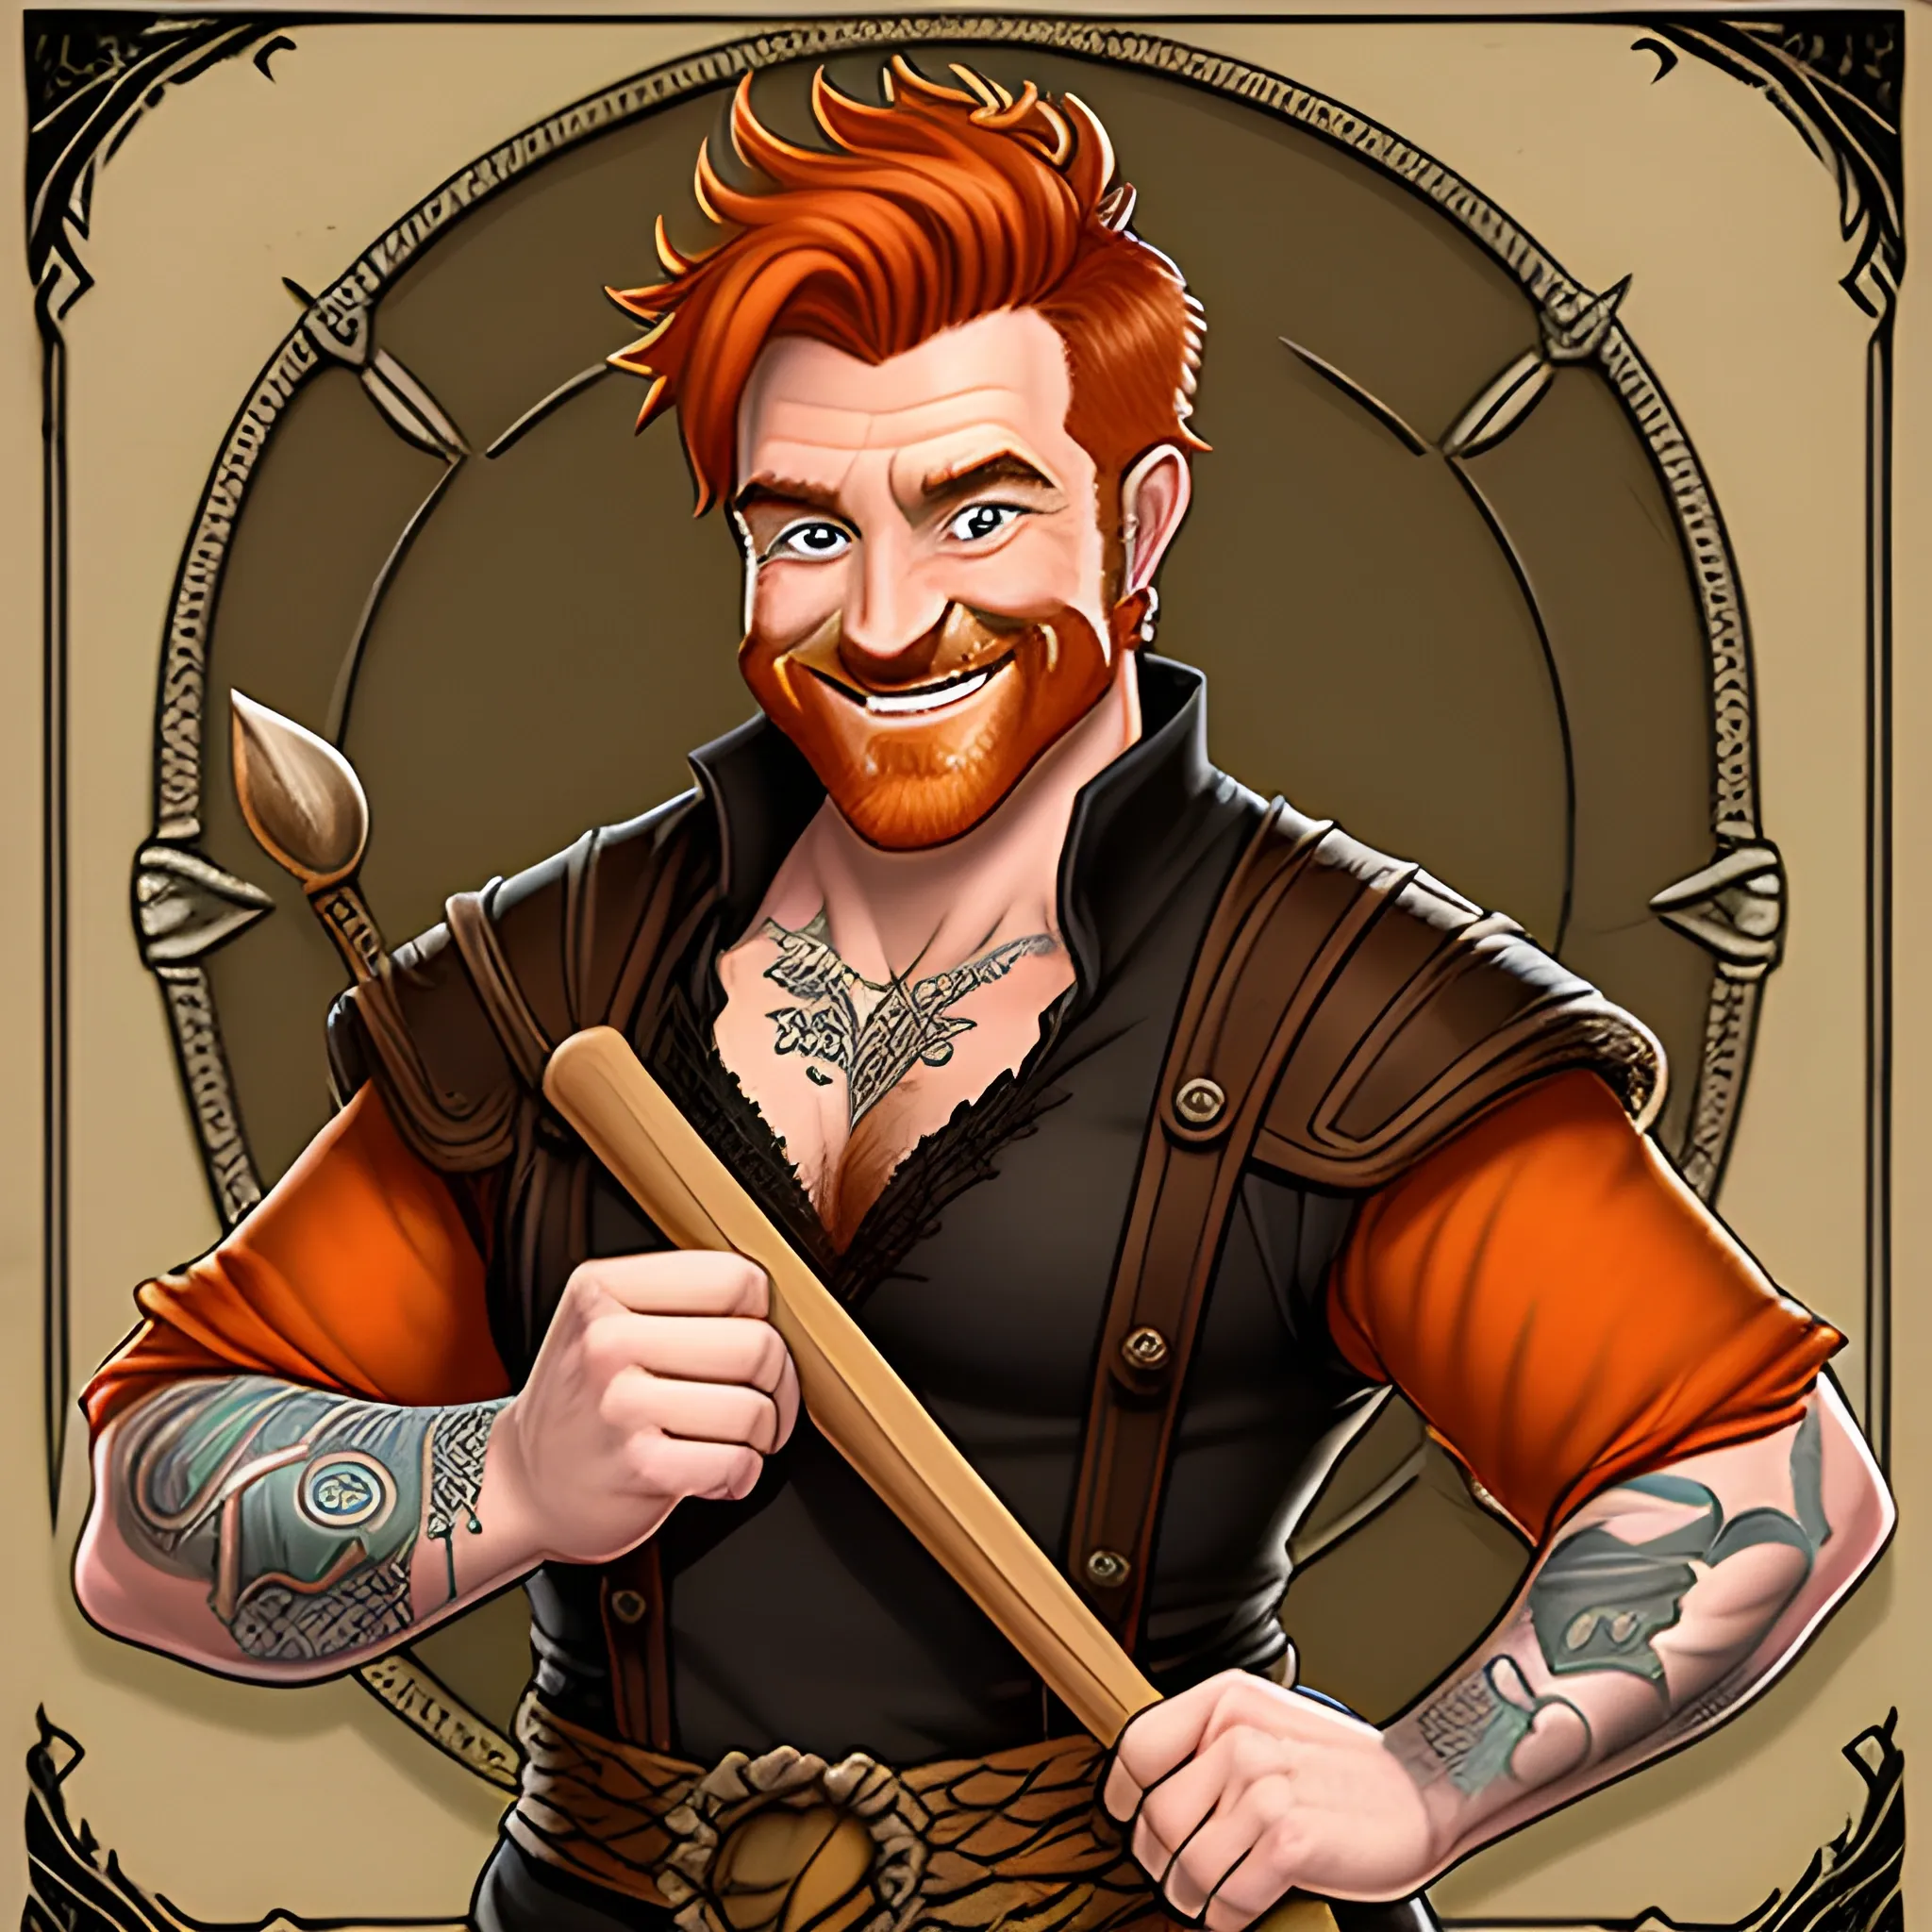 DnD teenage dad bod build male short haired halfling dark orange ginger with a perilla chest treasure map tatoo smiling with a mugshot expression and playing a small drum 